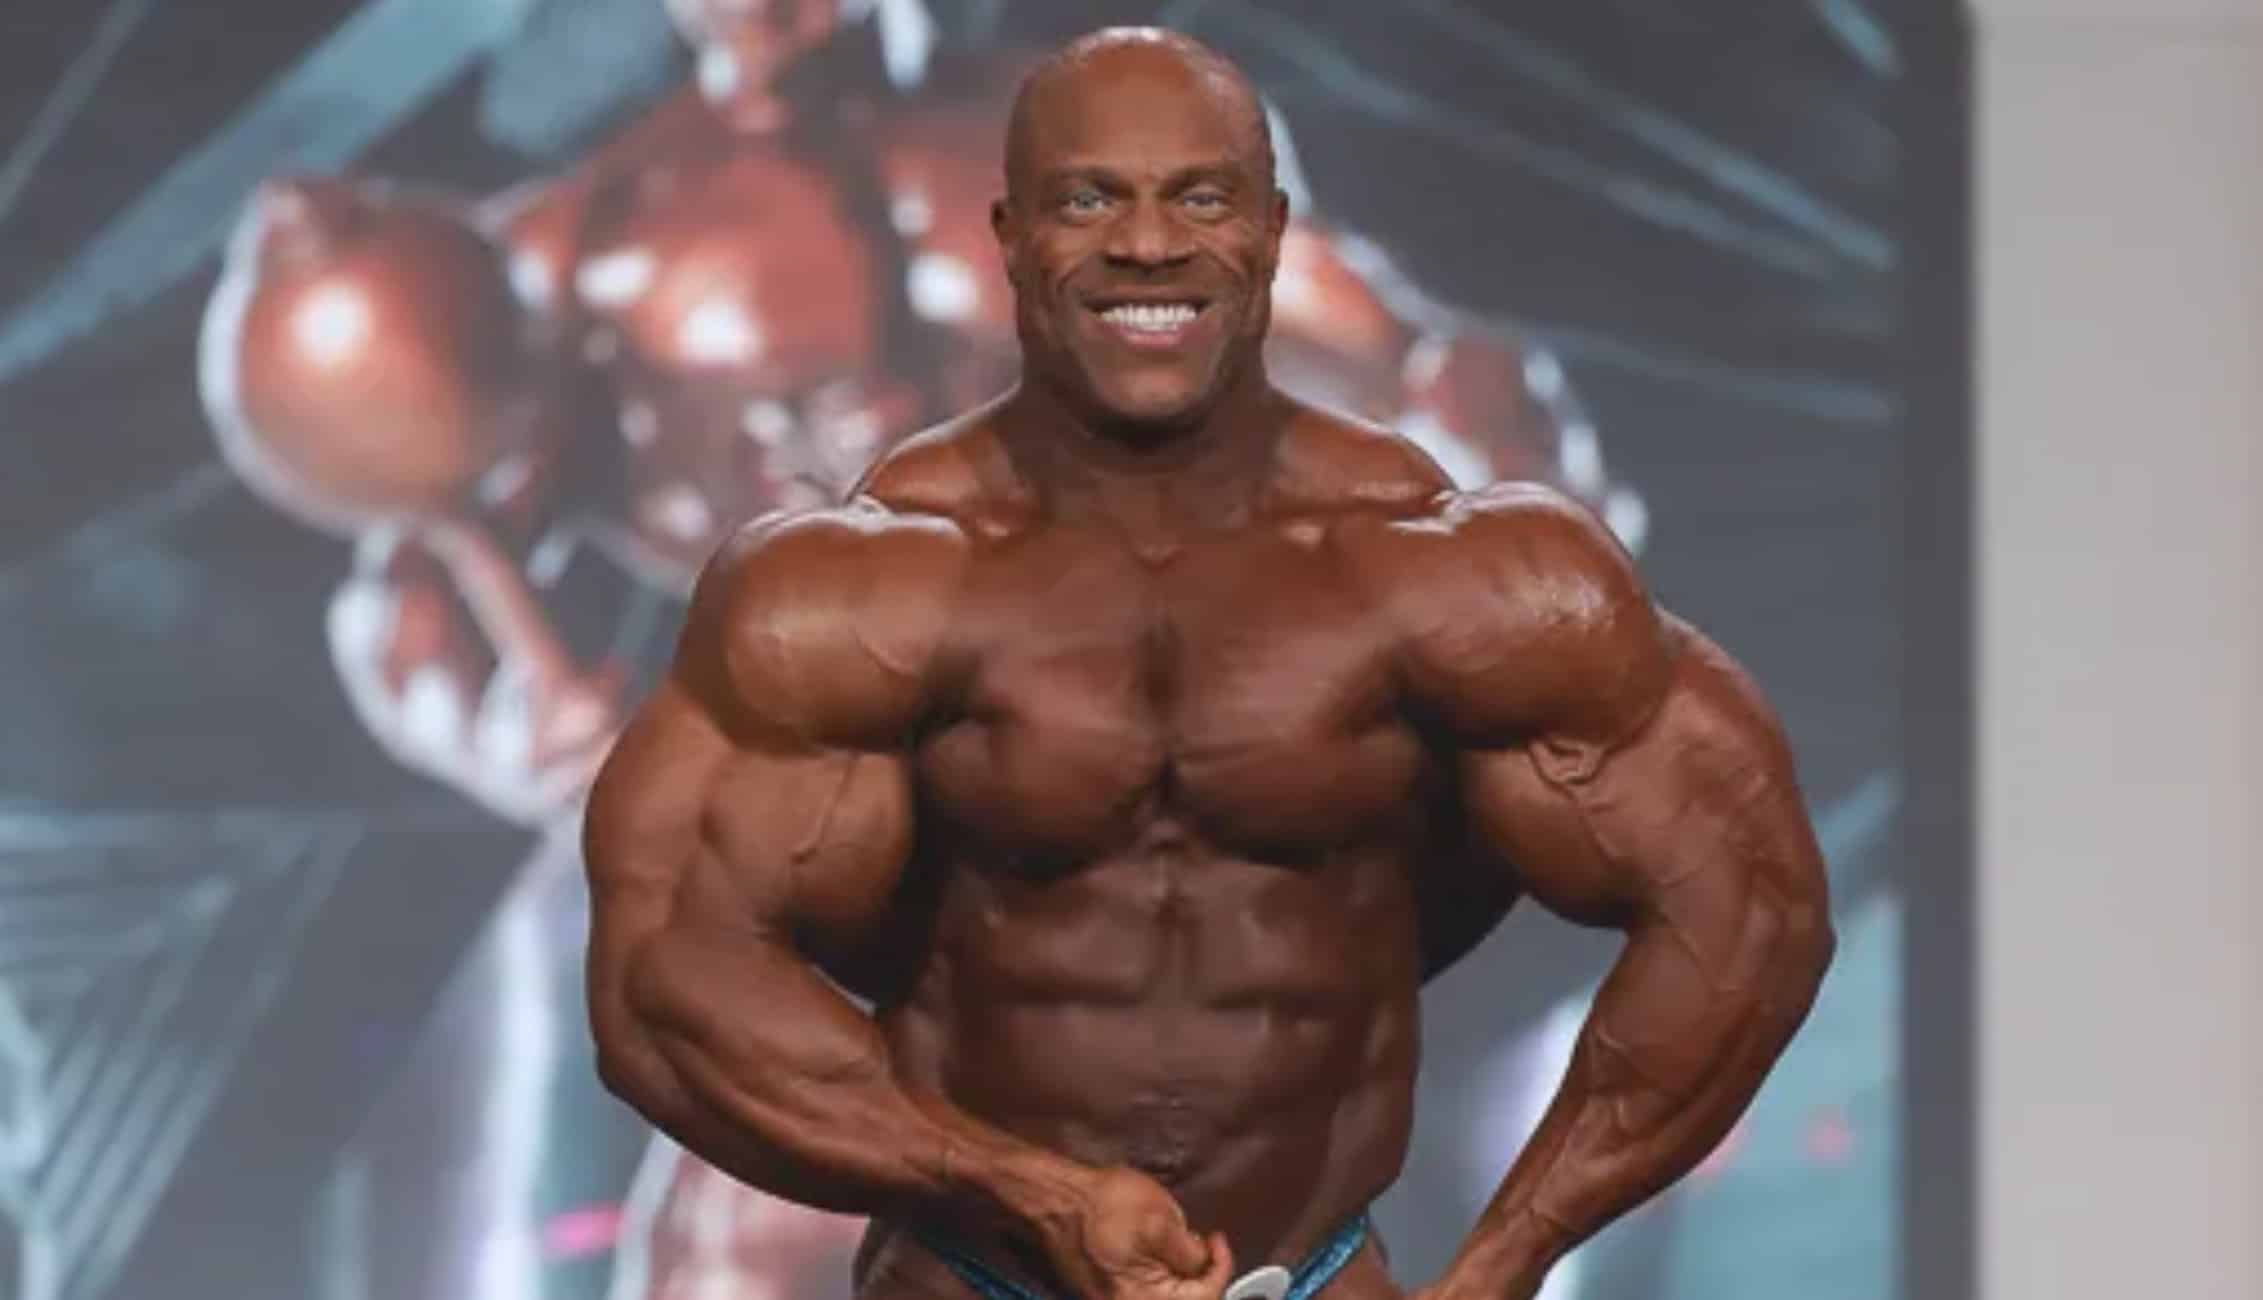 Flex Wheeler's back double bicep was a thing of beauty : r/bodybuilding